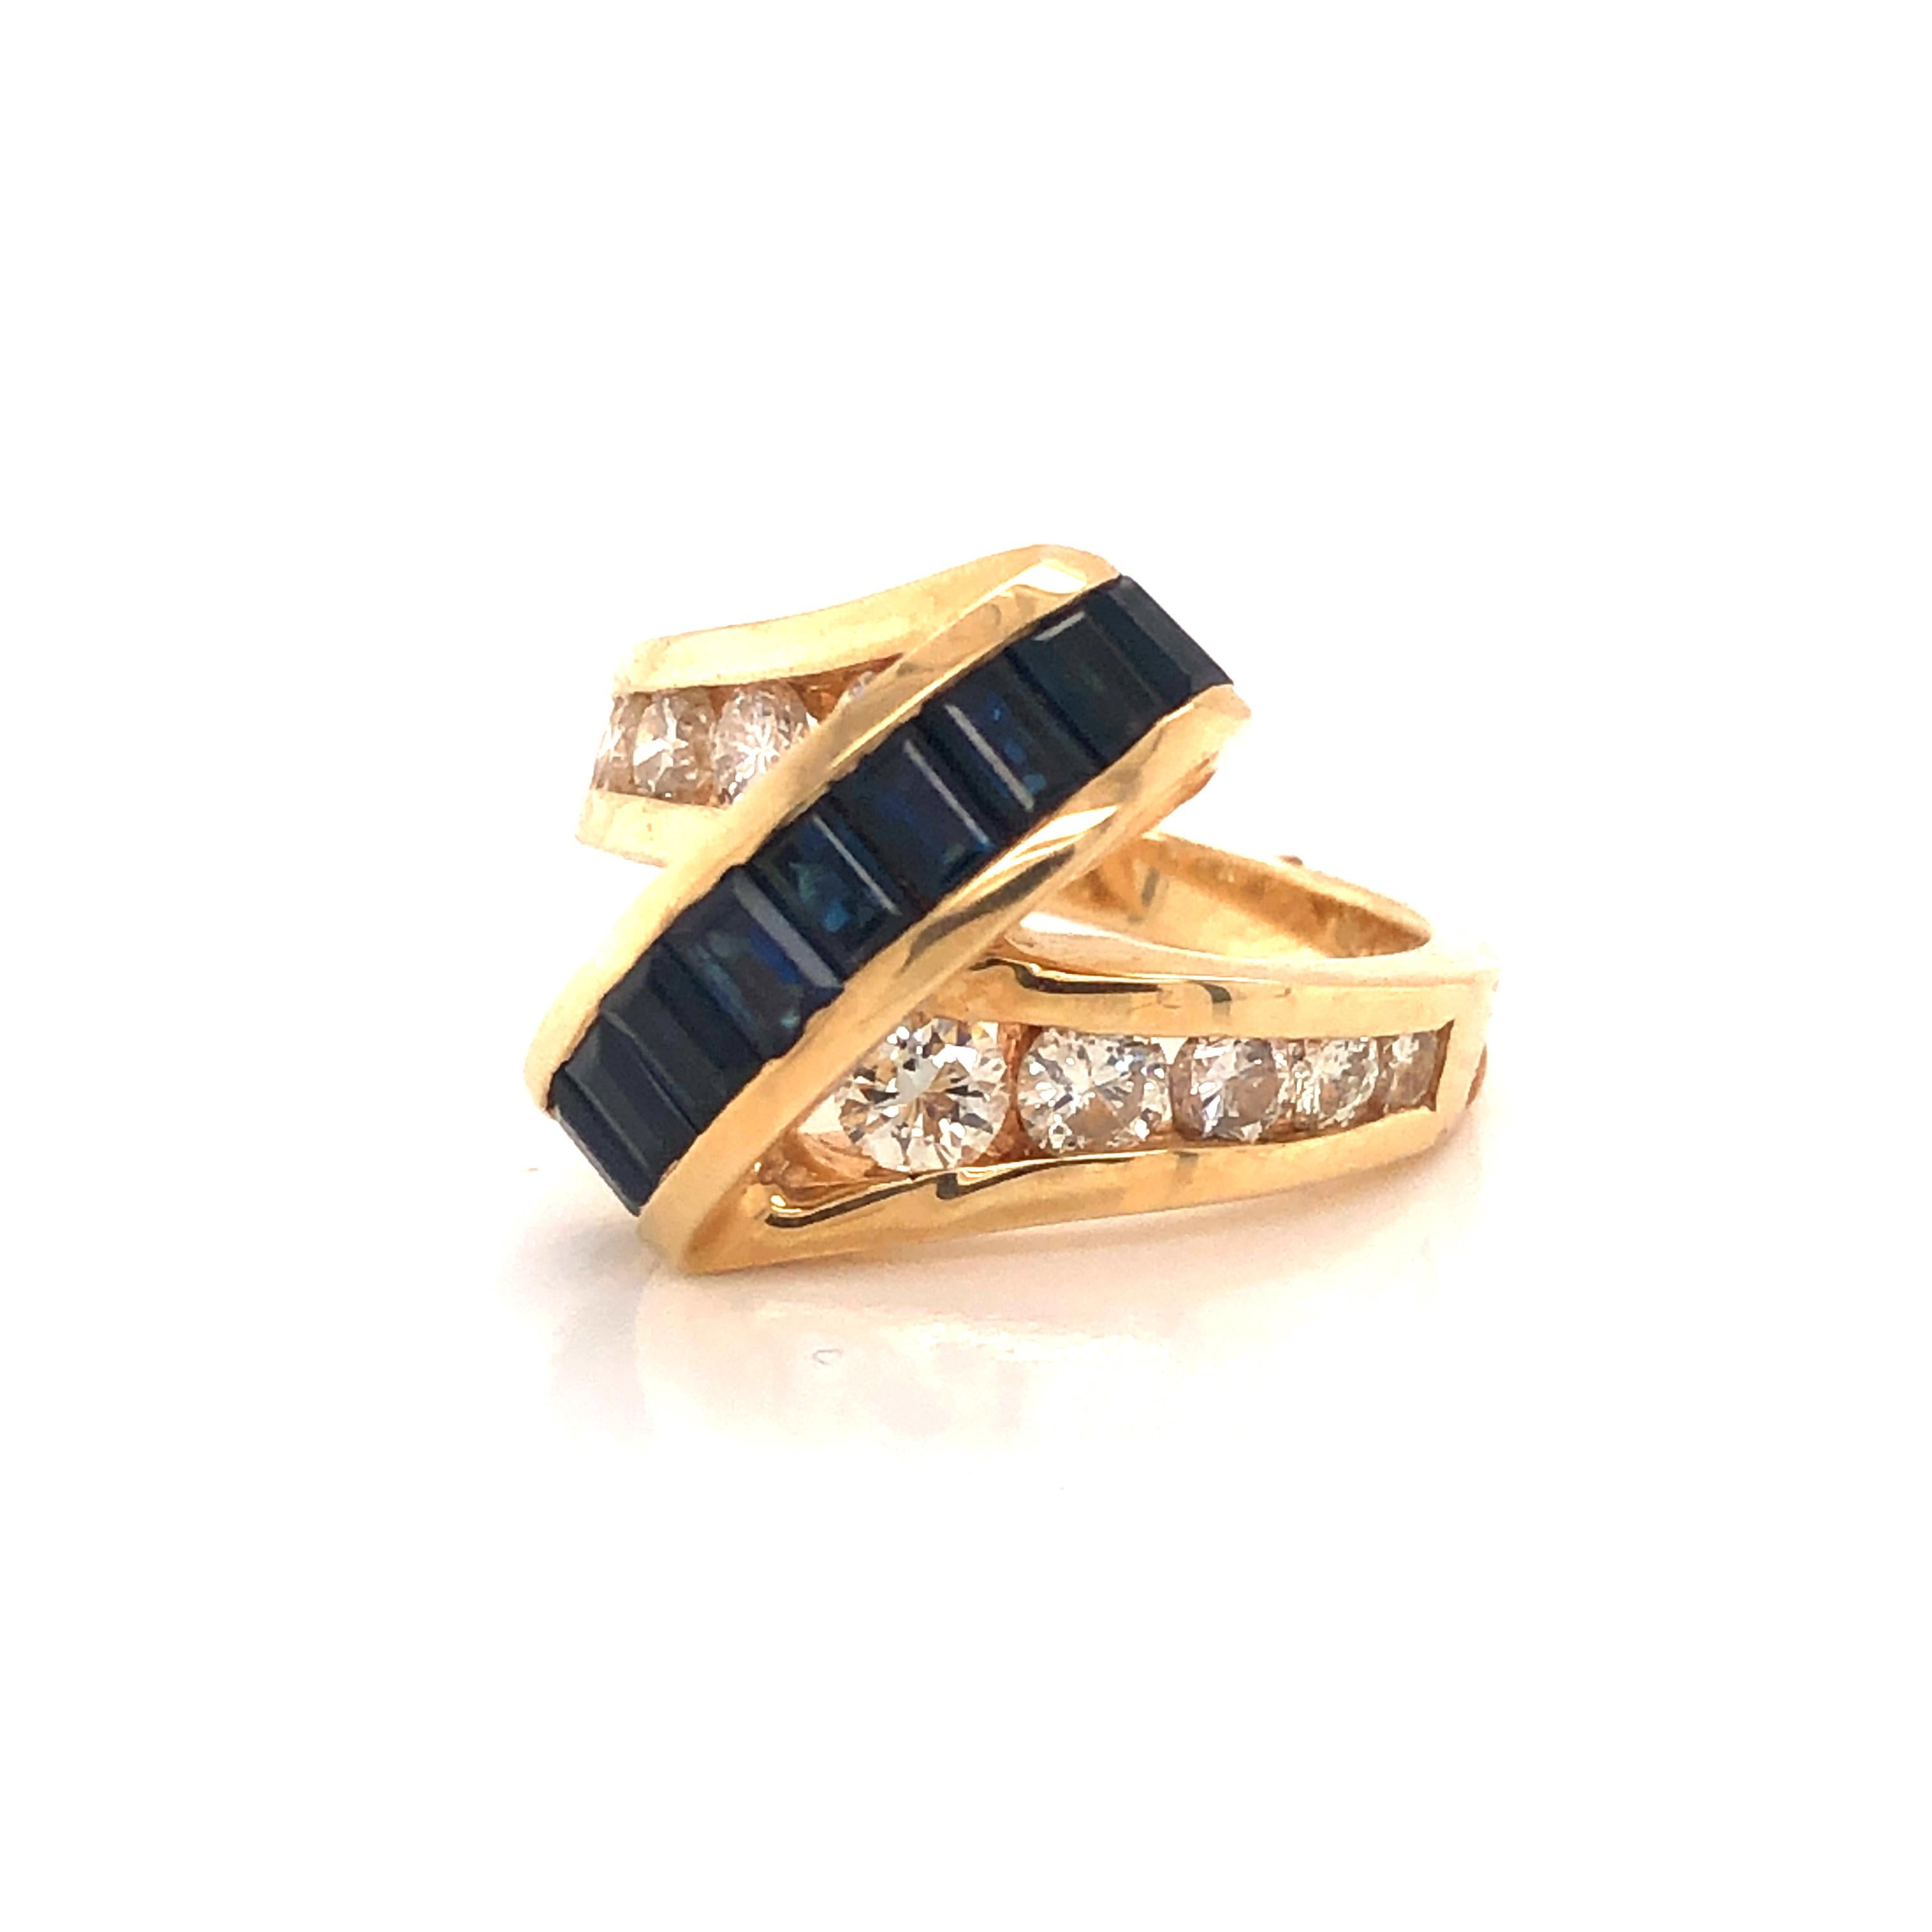 Swirling design on this fantastic cocktail ring crafted in 14k yellow gold. This 3-D styled ring is set with natural sapphires and diamonds that show angles where the gemstones appear raised off the ring. Ten square cut sapphires are set atop the